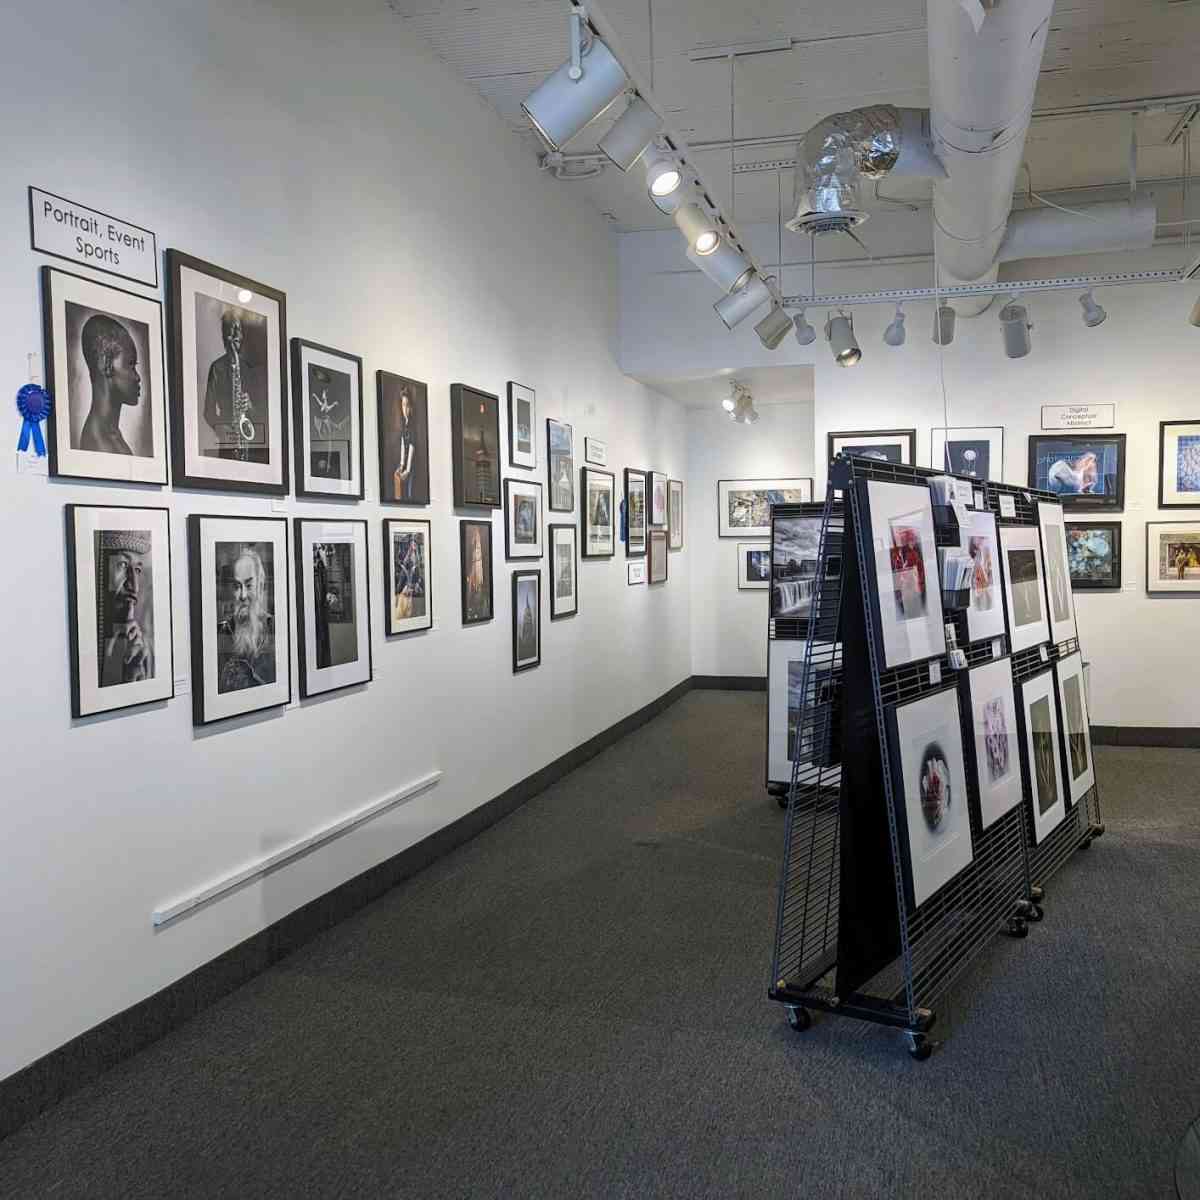 Image City Photography Gallery